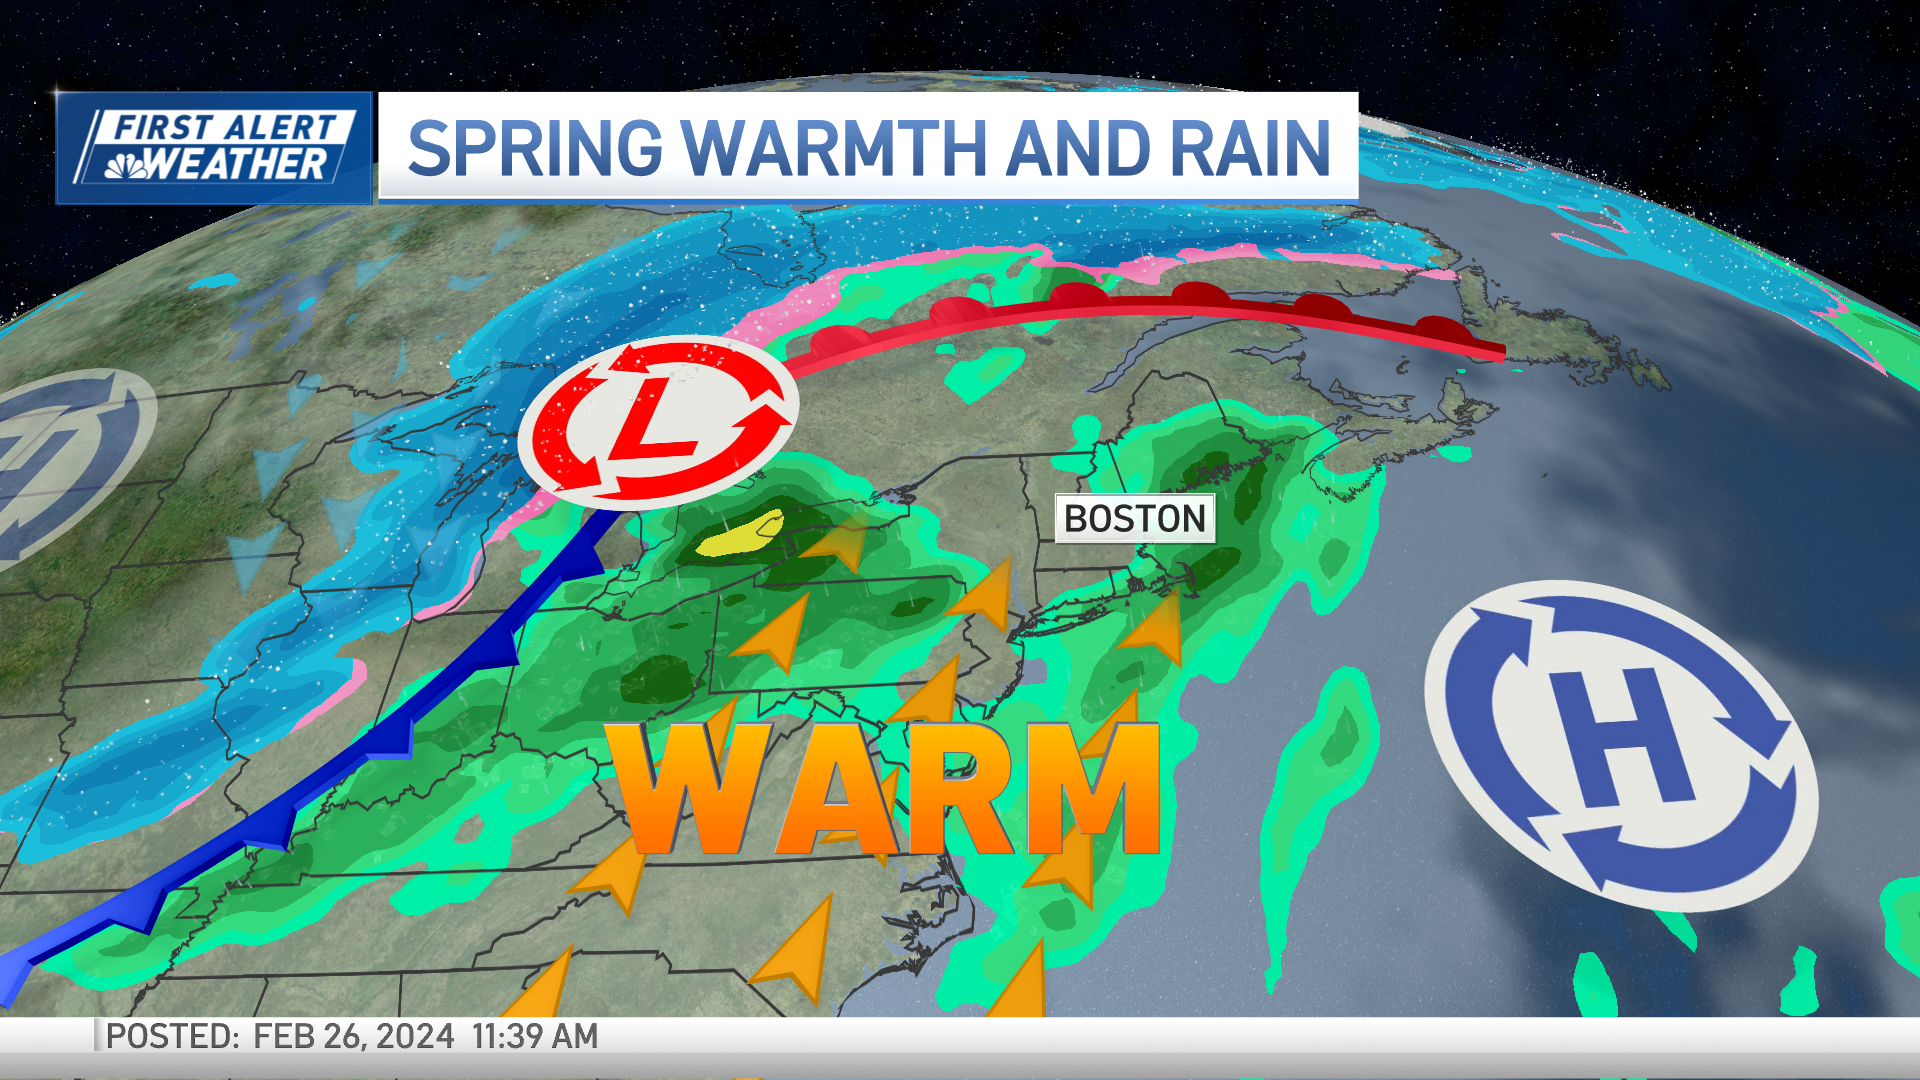 A map showing a low system over Michigan and a high system over the Atlantic Ocean that's bringing warm temperatures and rain to Boston.